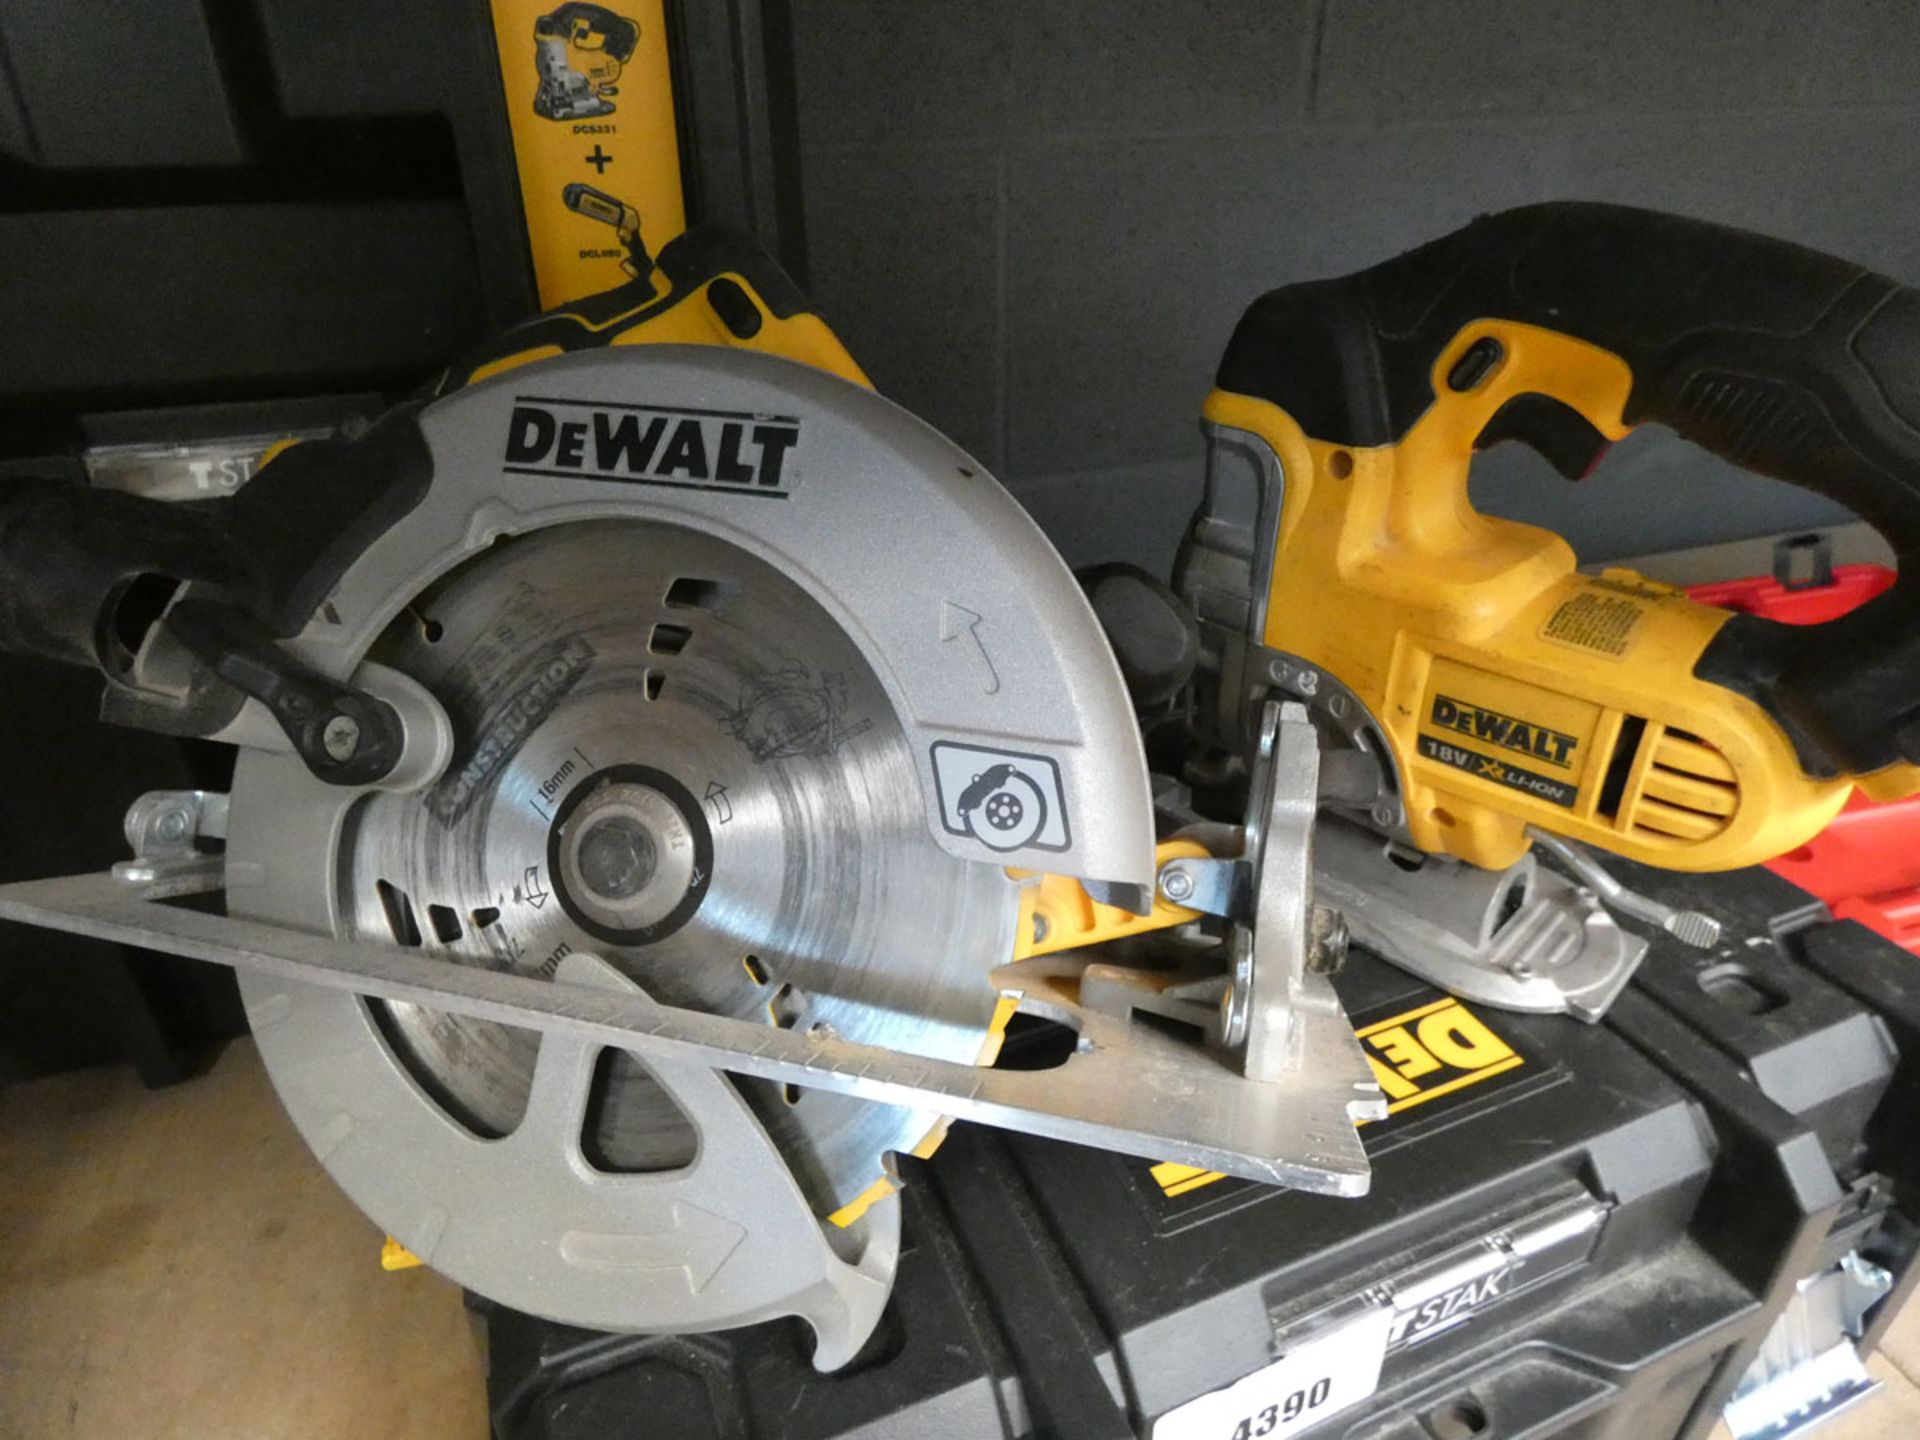 Dewalt tool kit consisting of drill, impact driver, torch, circular saw, jigsaw, 3 batteries and - Image 2 of 3